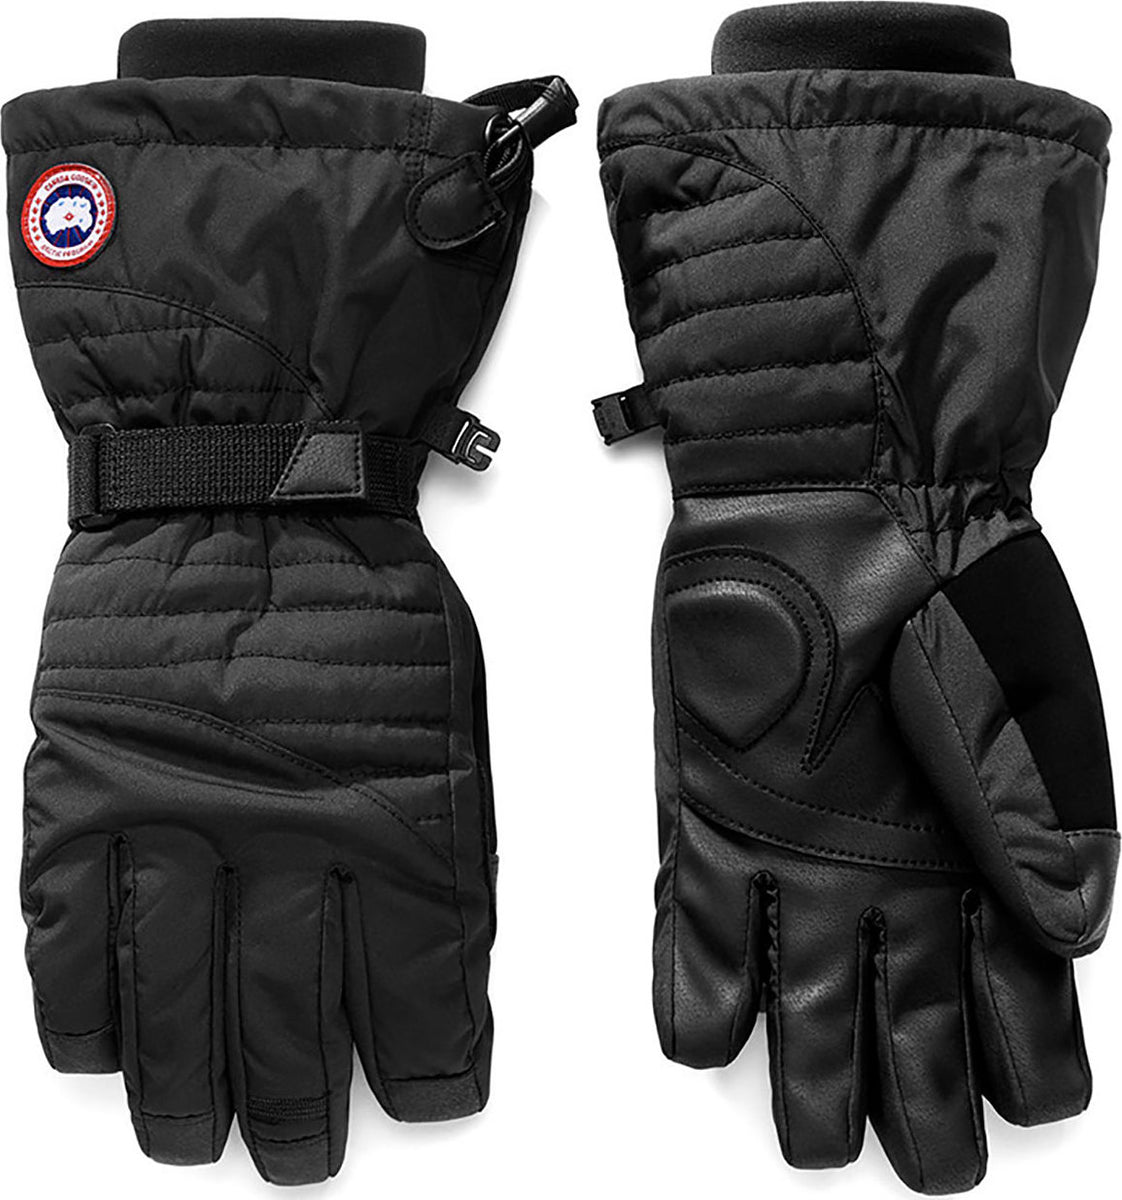 Canada Goose Arctic Down Gloves - Women's | Altitude Sports